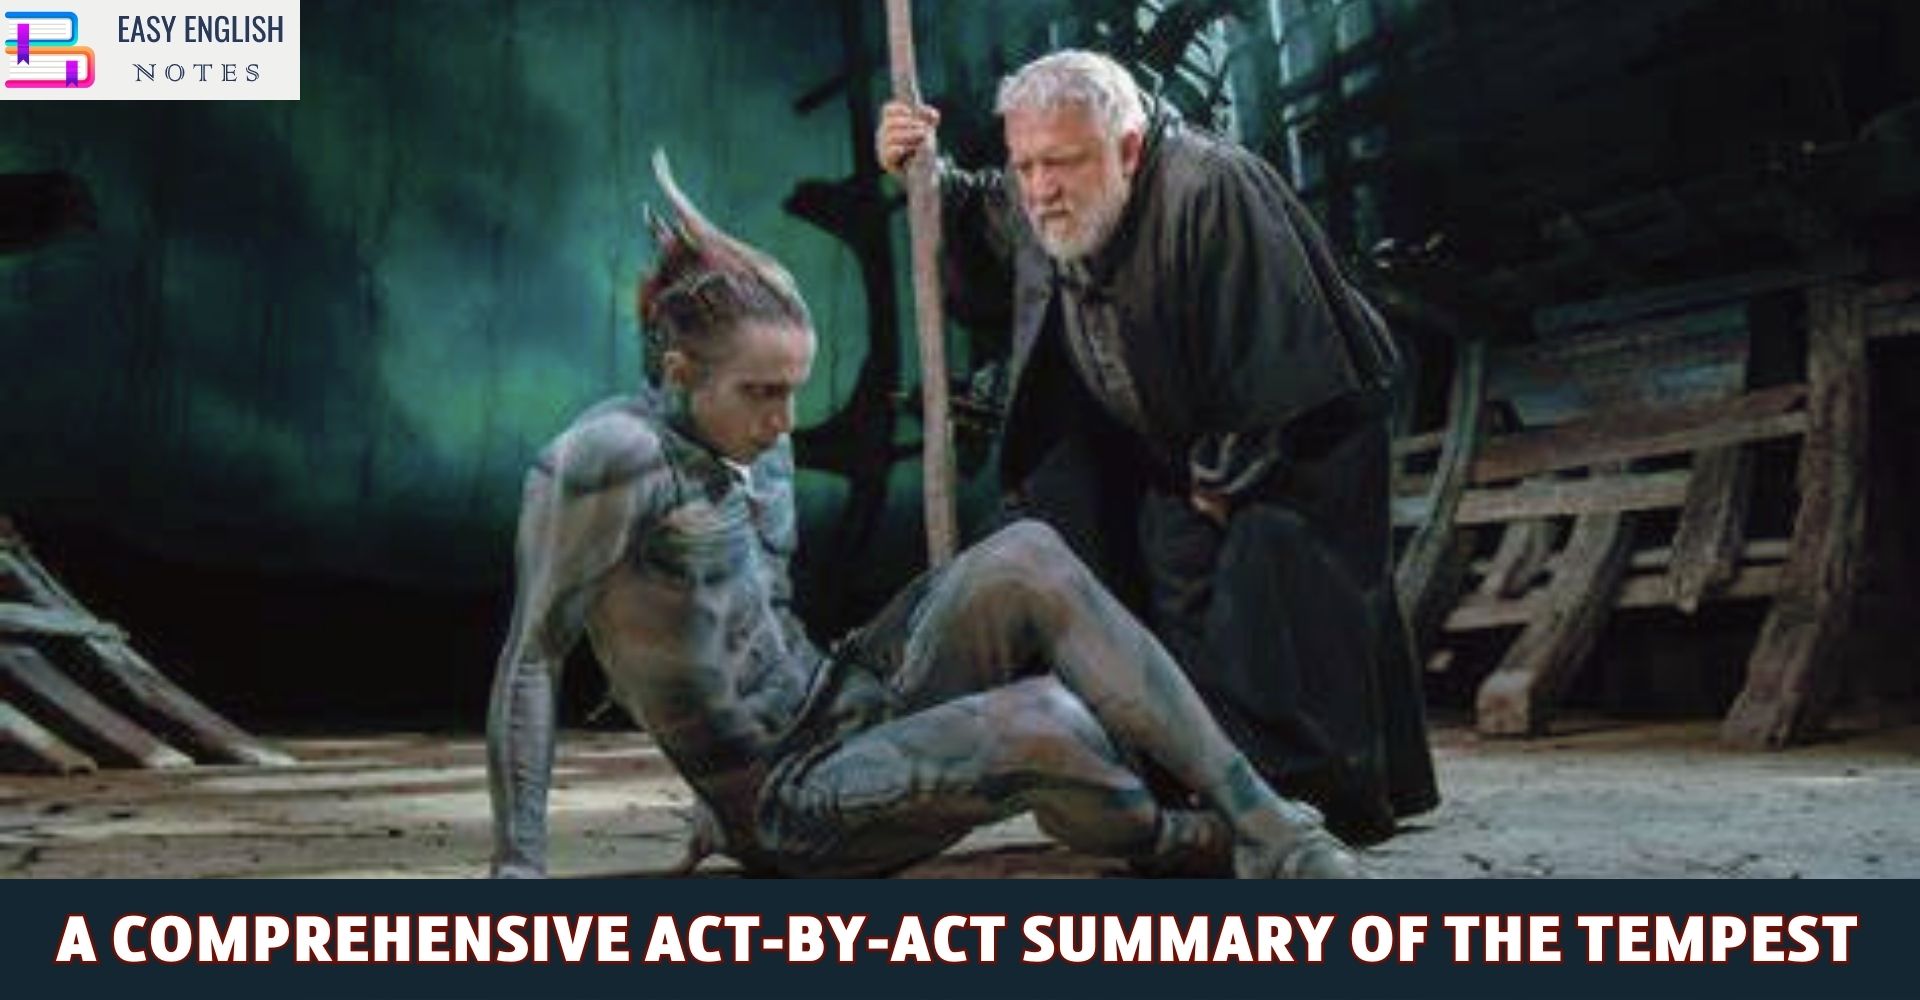 A Comprehensive Act-by-Act Summary of The Tempest